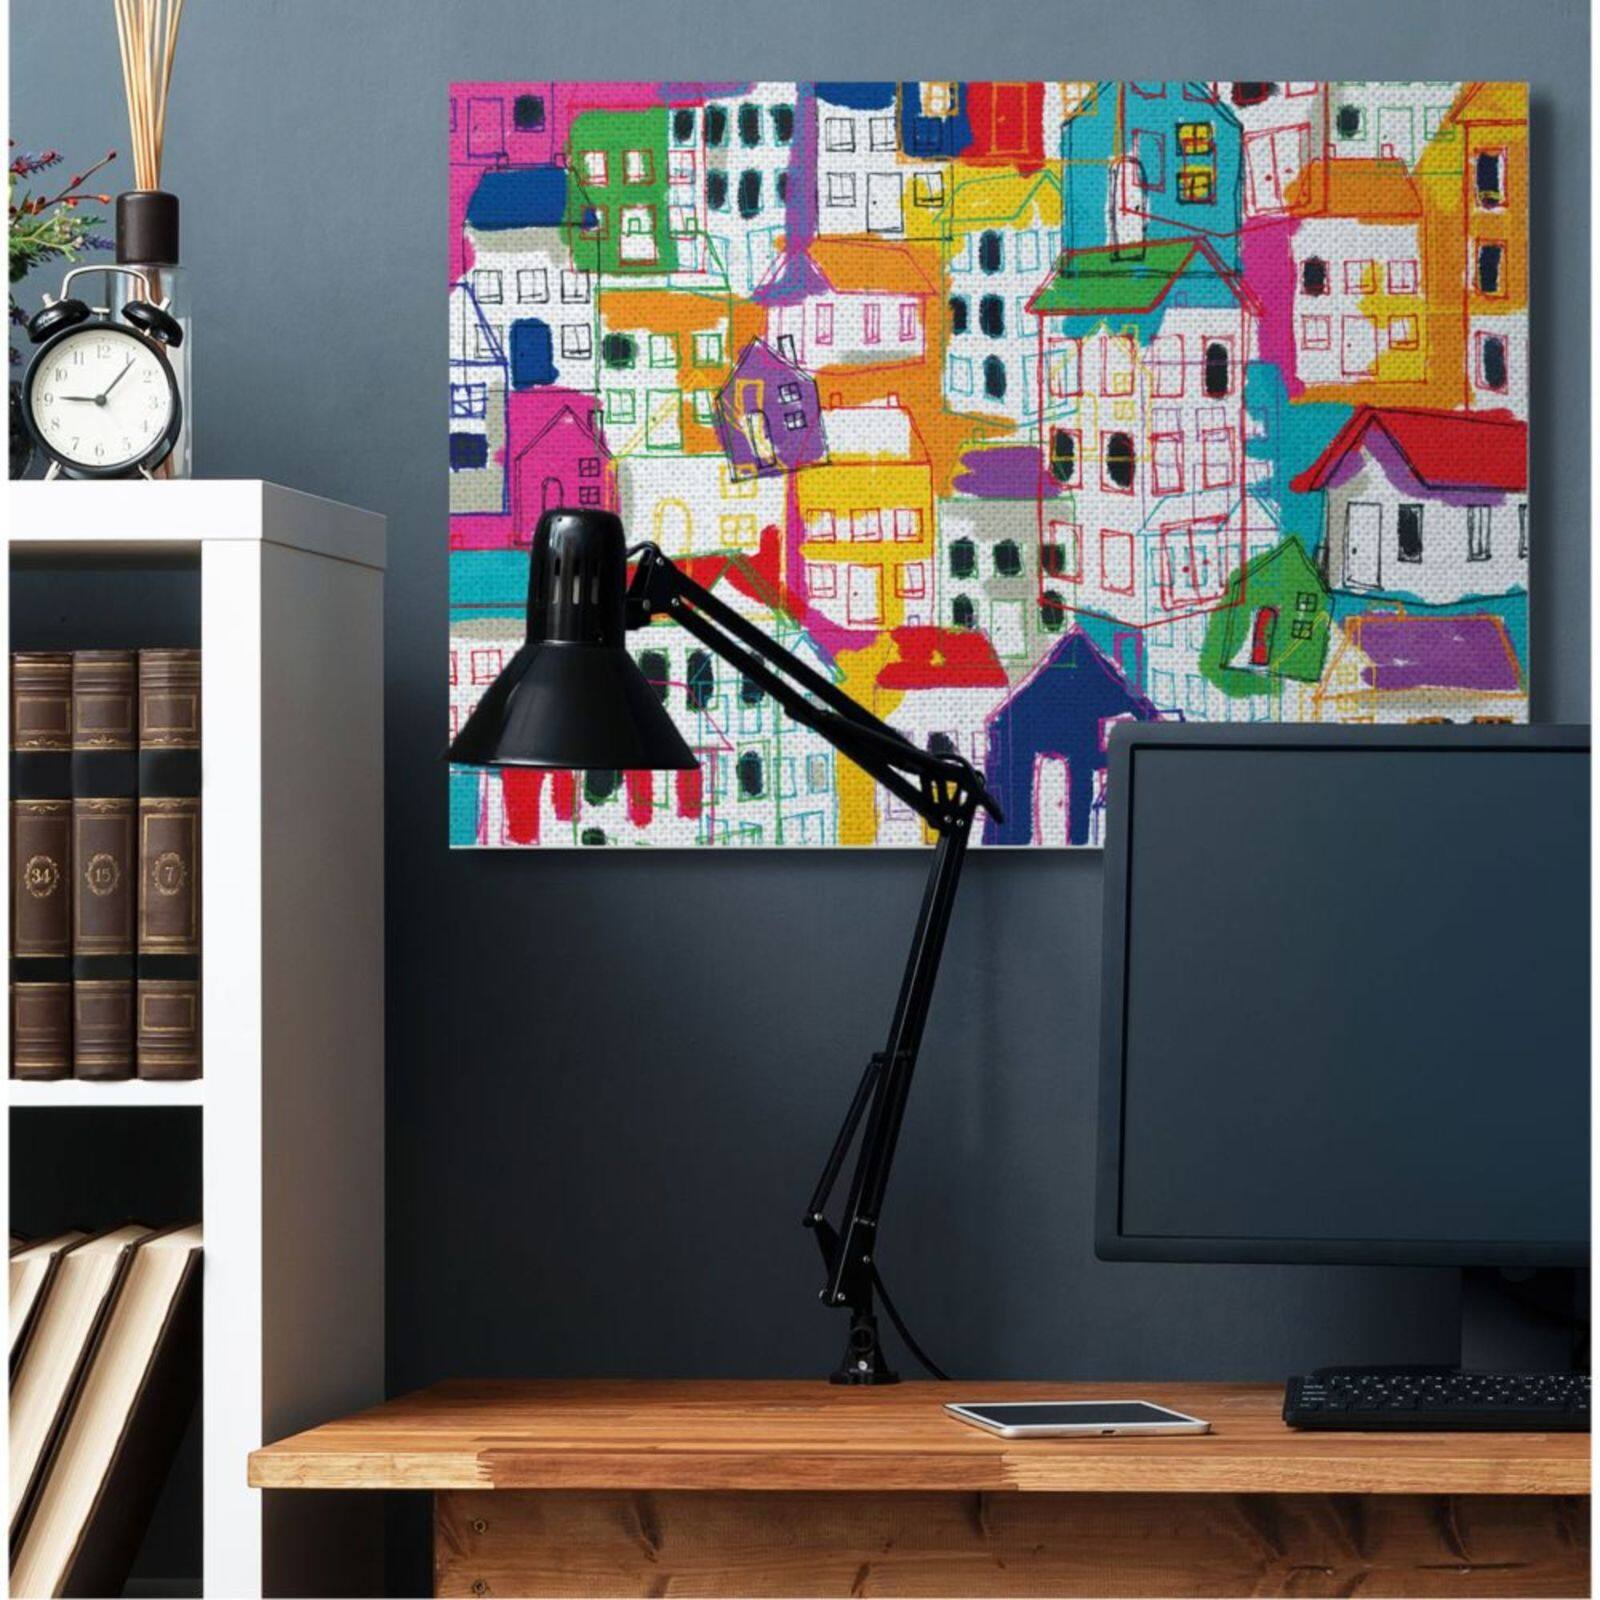 Stupell Industries Colorful Abstract Geometric Town Pattern Wall Accent